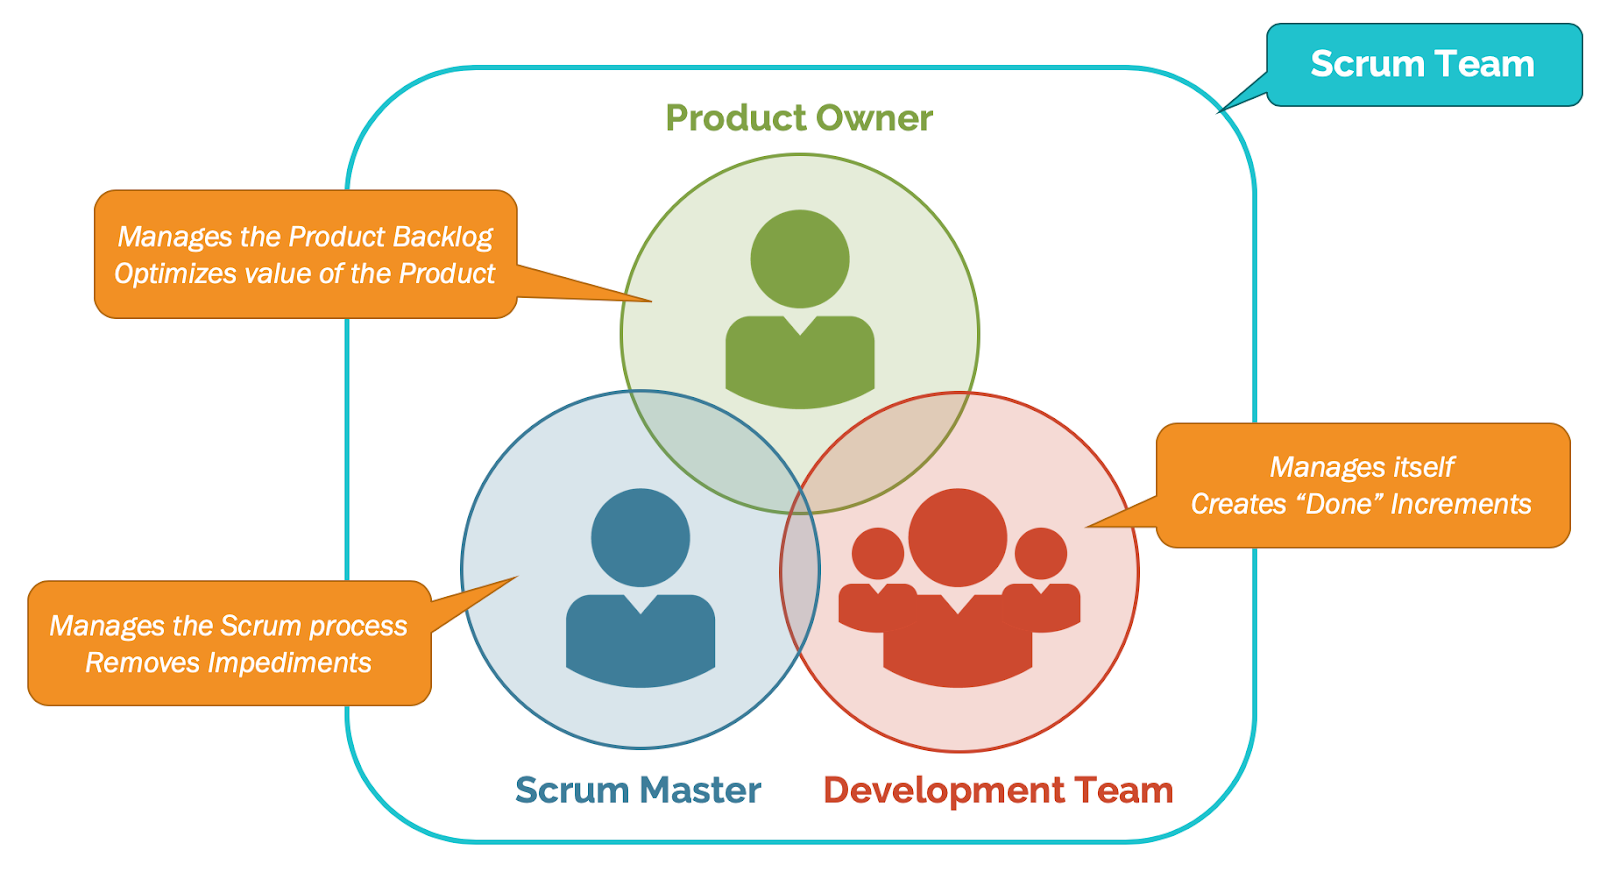 What are the different focus values and roles in scrum